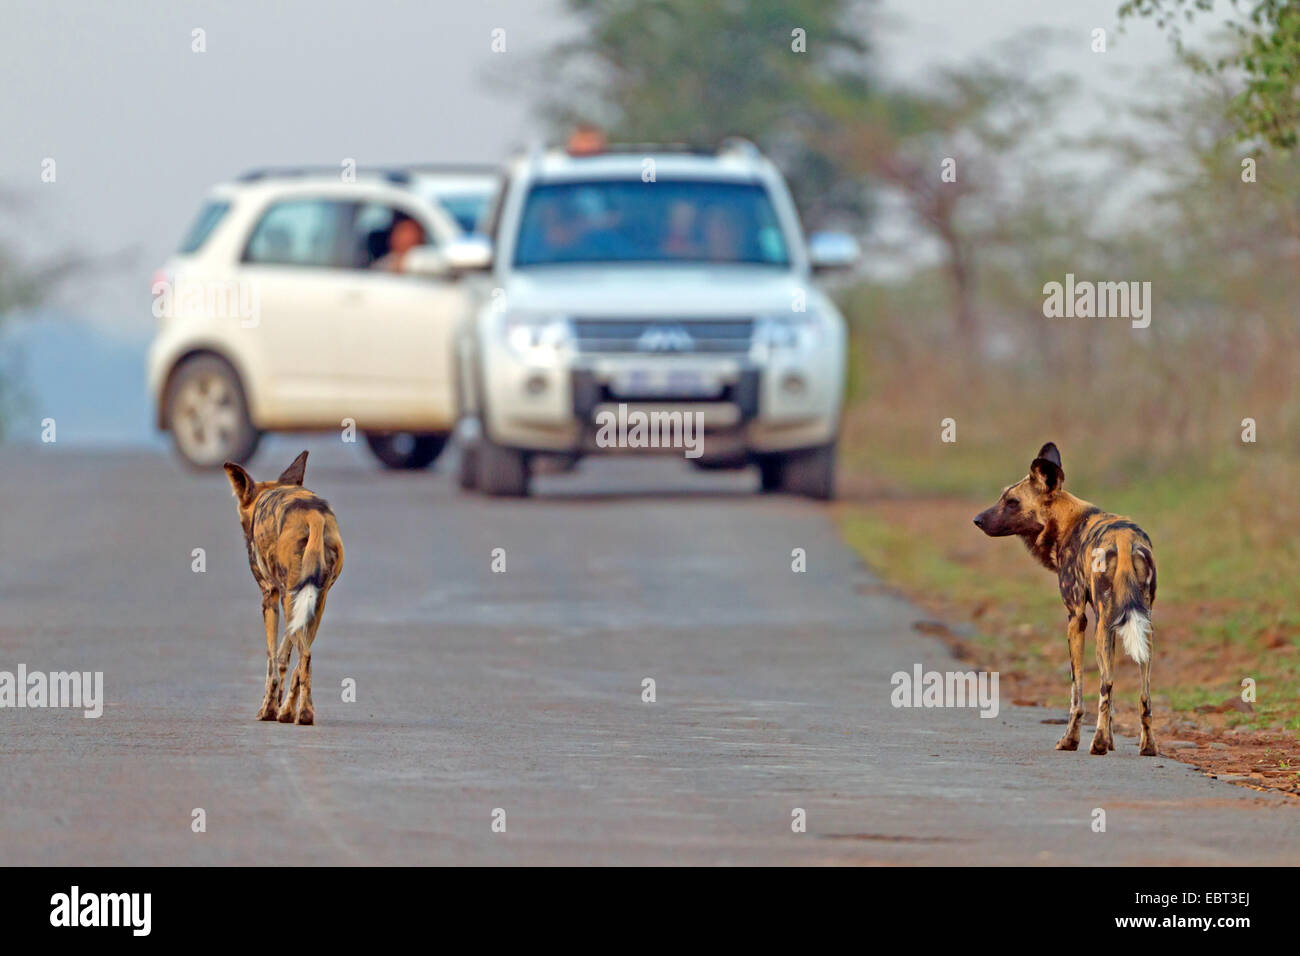 African wild dog, African hunting dog, Cape hunting dog, Painted dog, Painted wolf, Painted hunting dog, Spotted dog, Ornate wolf (Lycaon pictus), two African wild dogs on a road, cars in background, South Africa, Hluhluwe-Umfolozi National Park Stock Photo